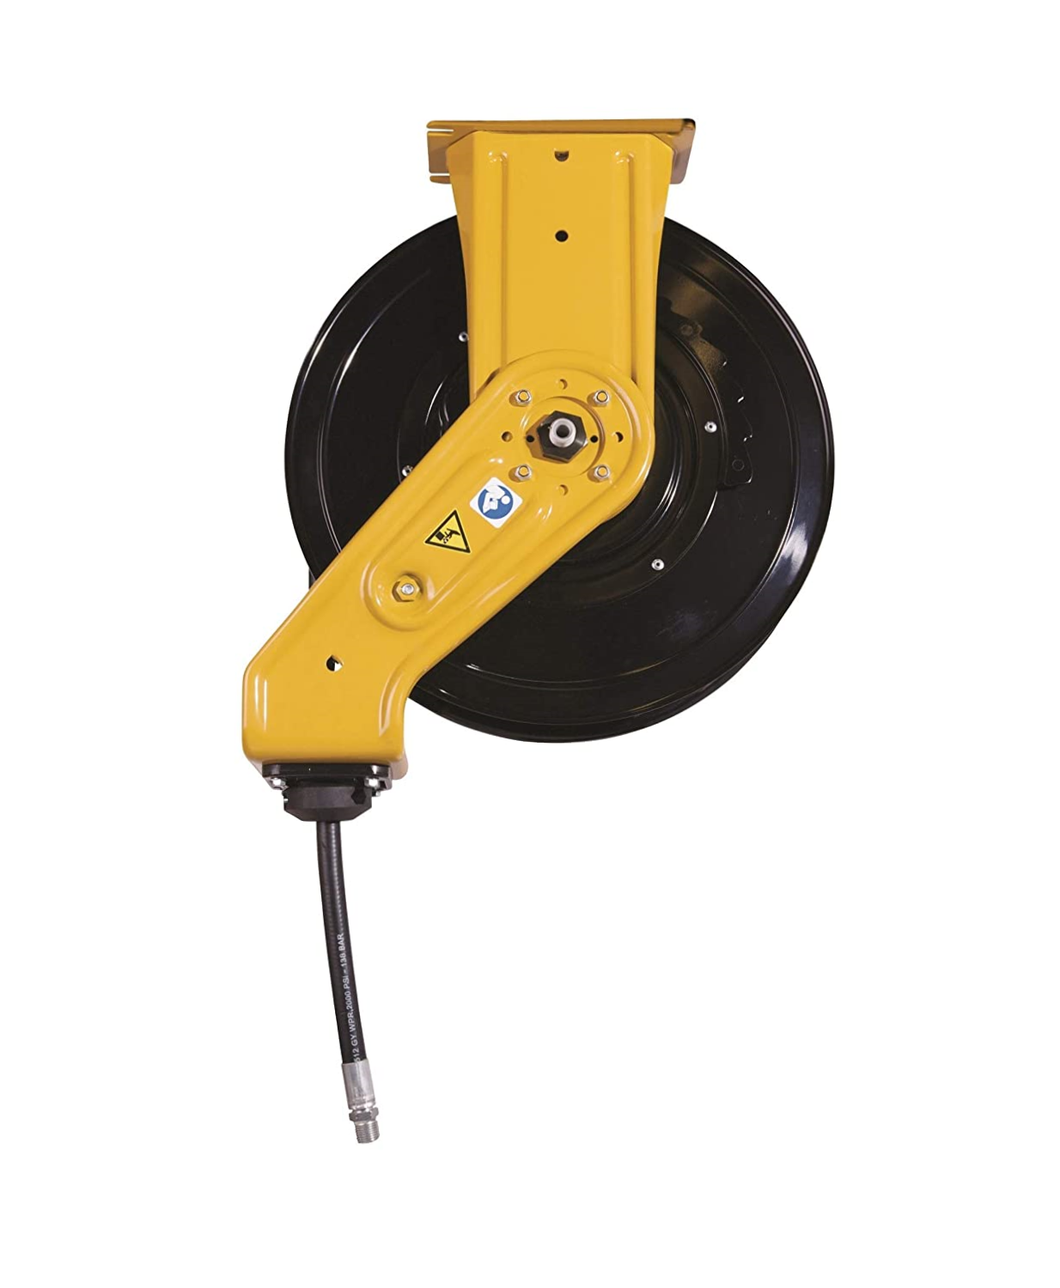 Graco SD 10 Series Hose Reel w/ 3/8 in. X 35 ft. Hose - Air/Water - Yellow (Overhead Mount)